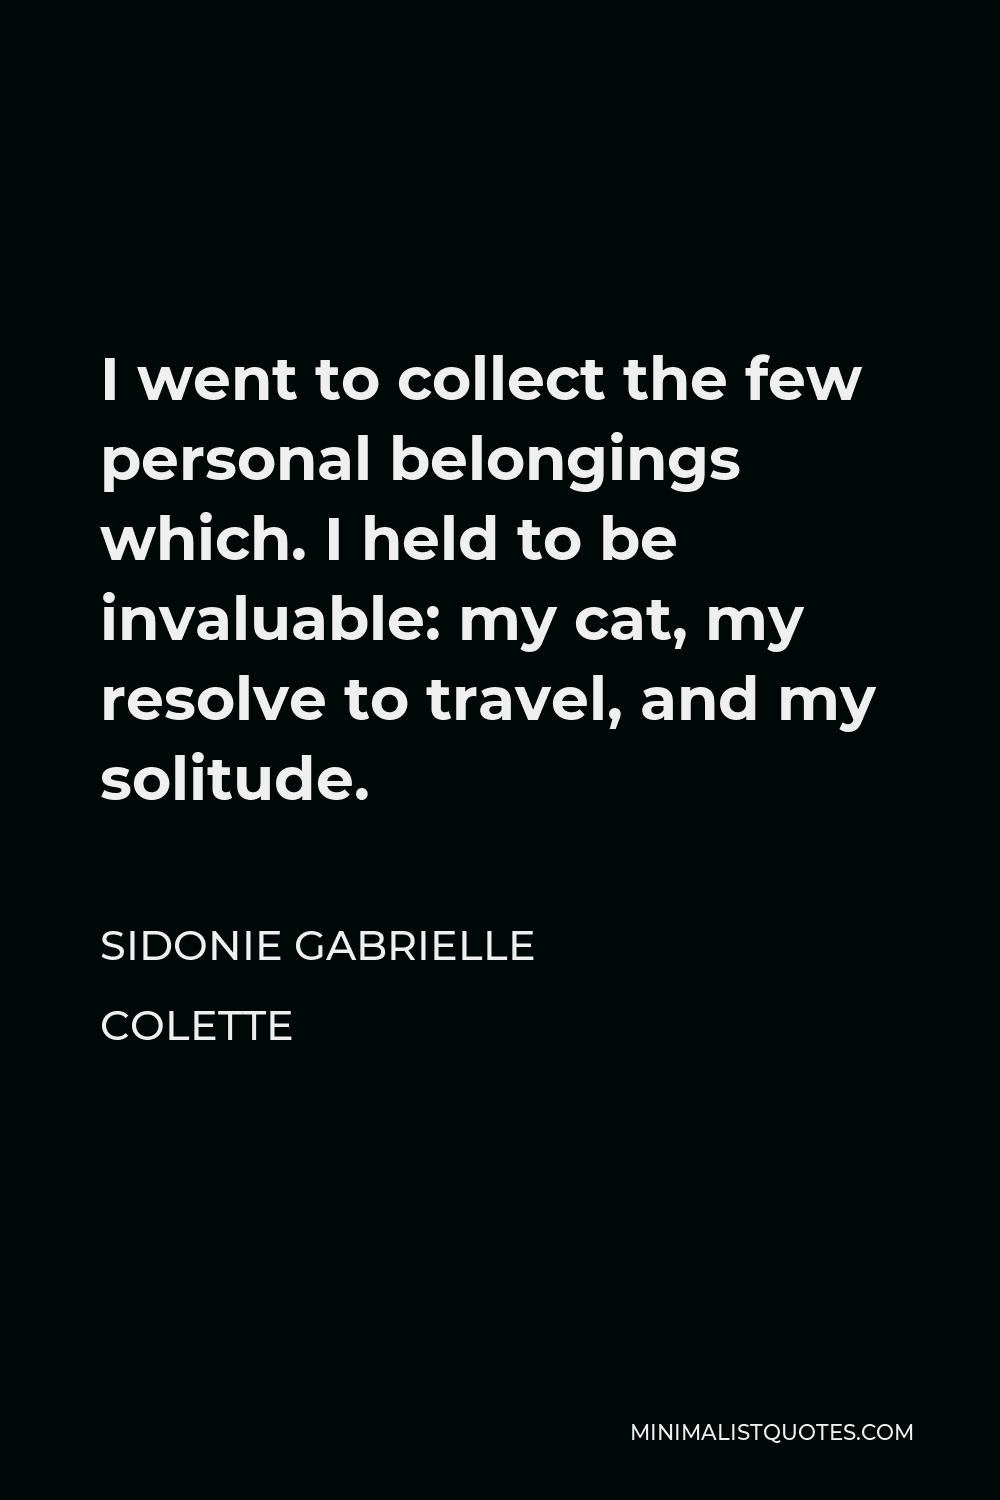 Sidonie Gabrielle Colette Quote - I went to collect the few personal belongings which. I held to be invaluable: my cat, my resolve to travel, and my solitude.